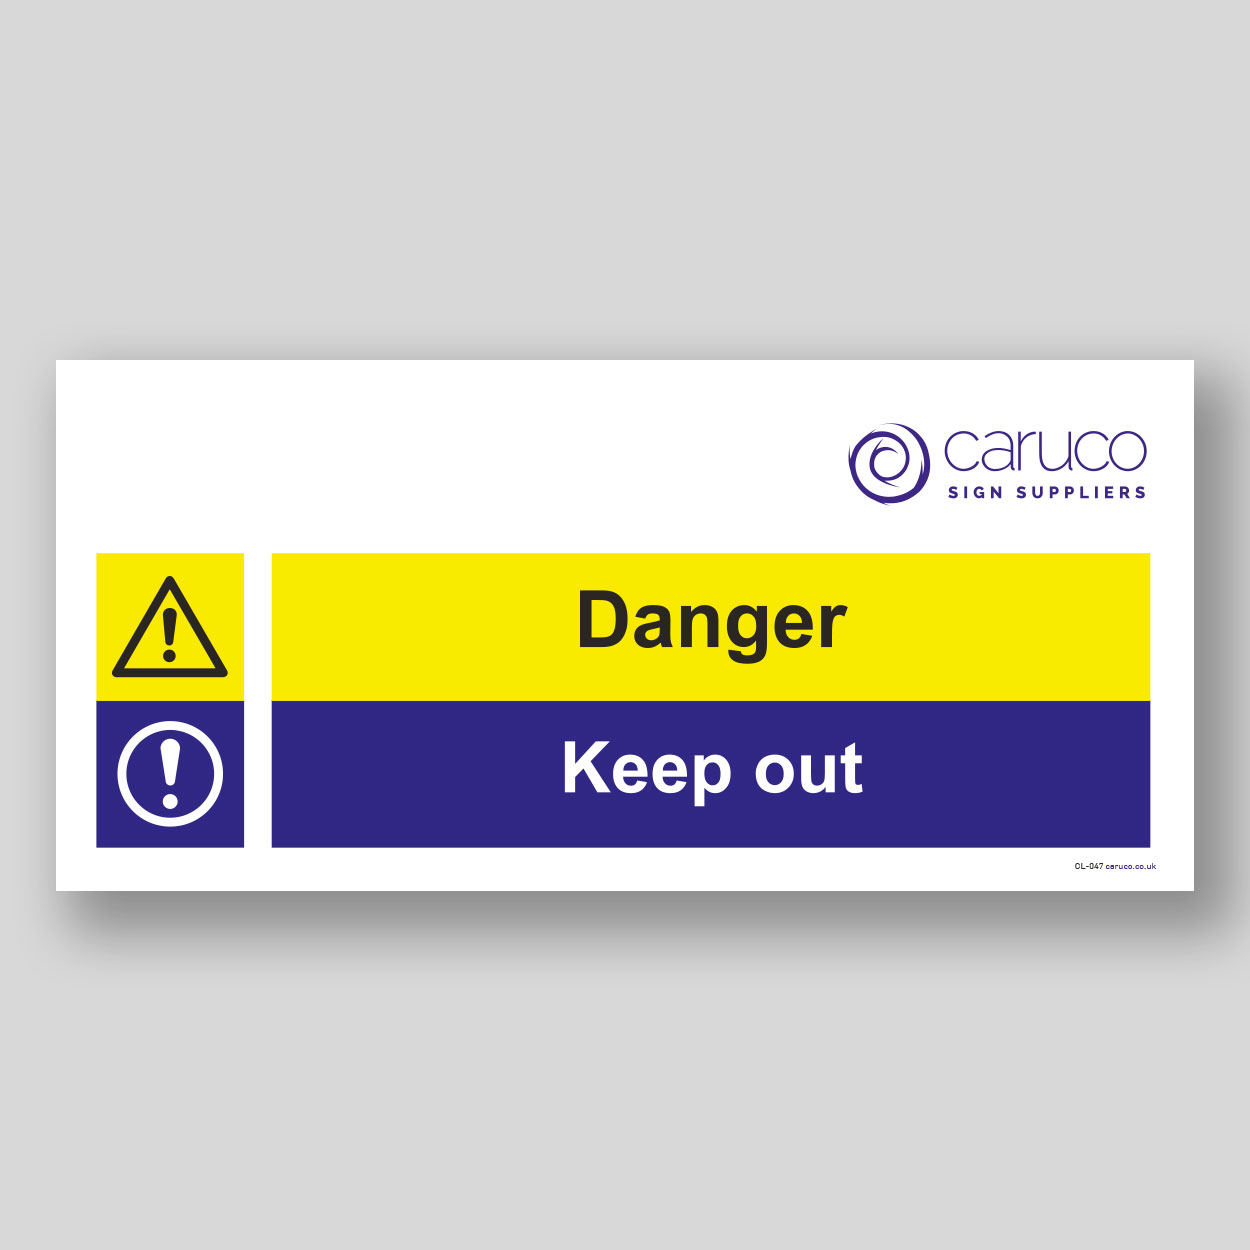 CL-047 Danger - keep out